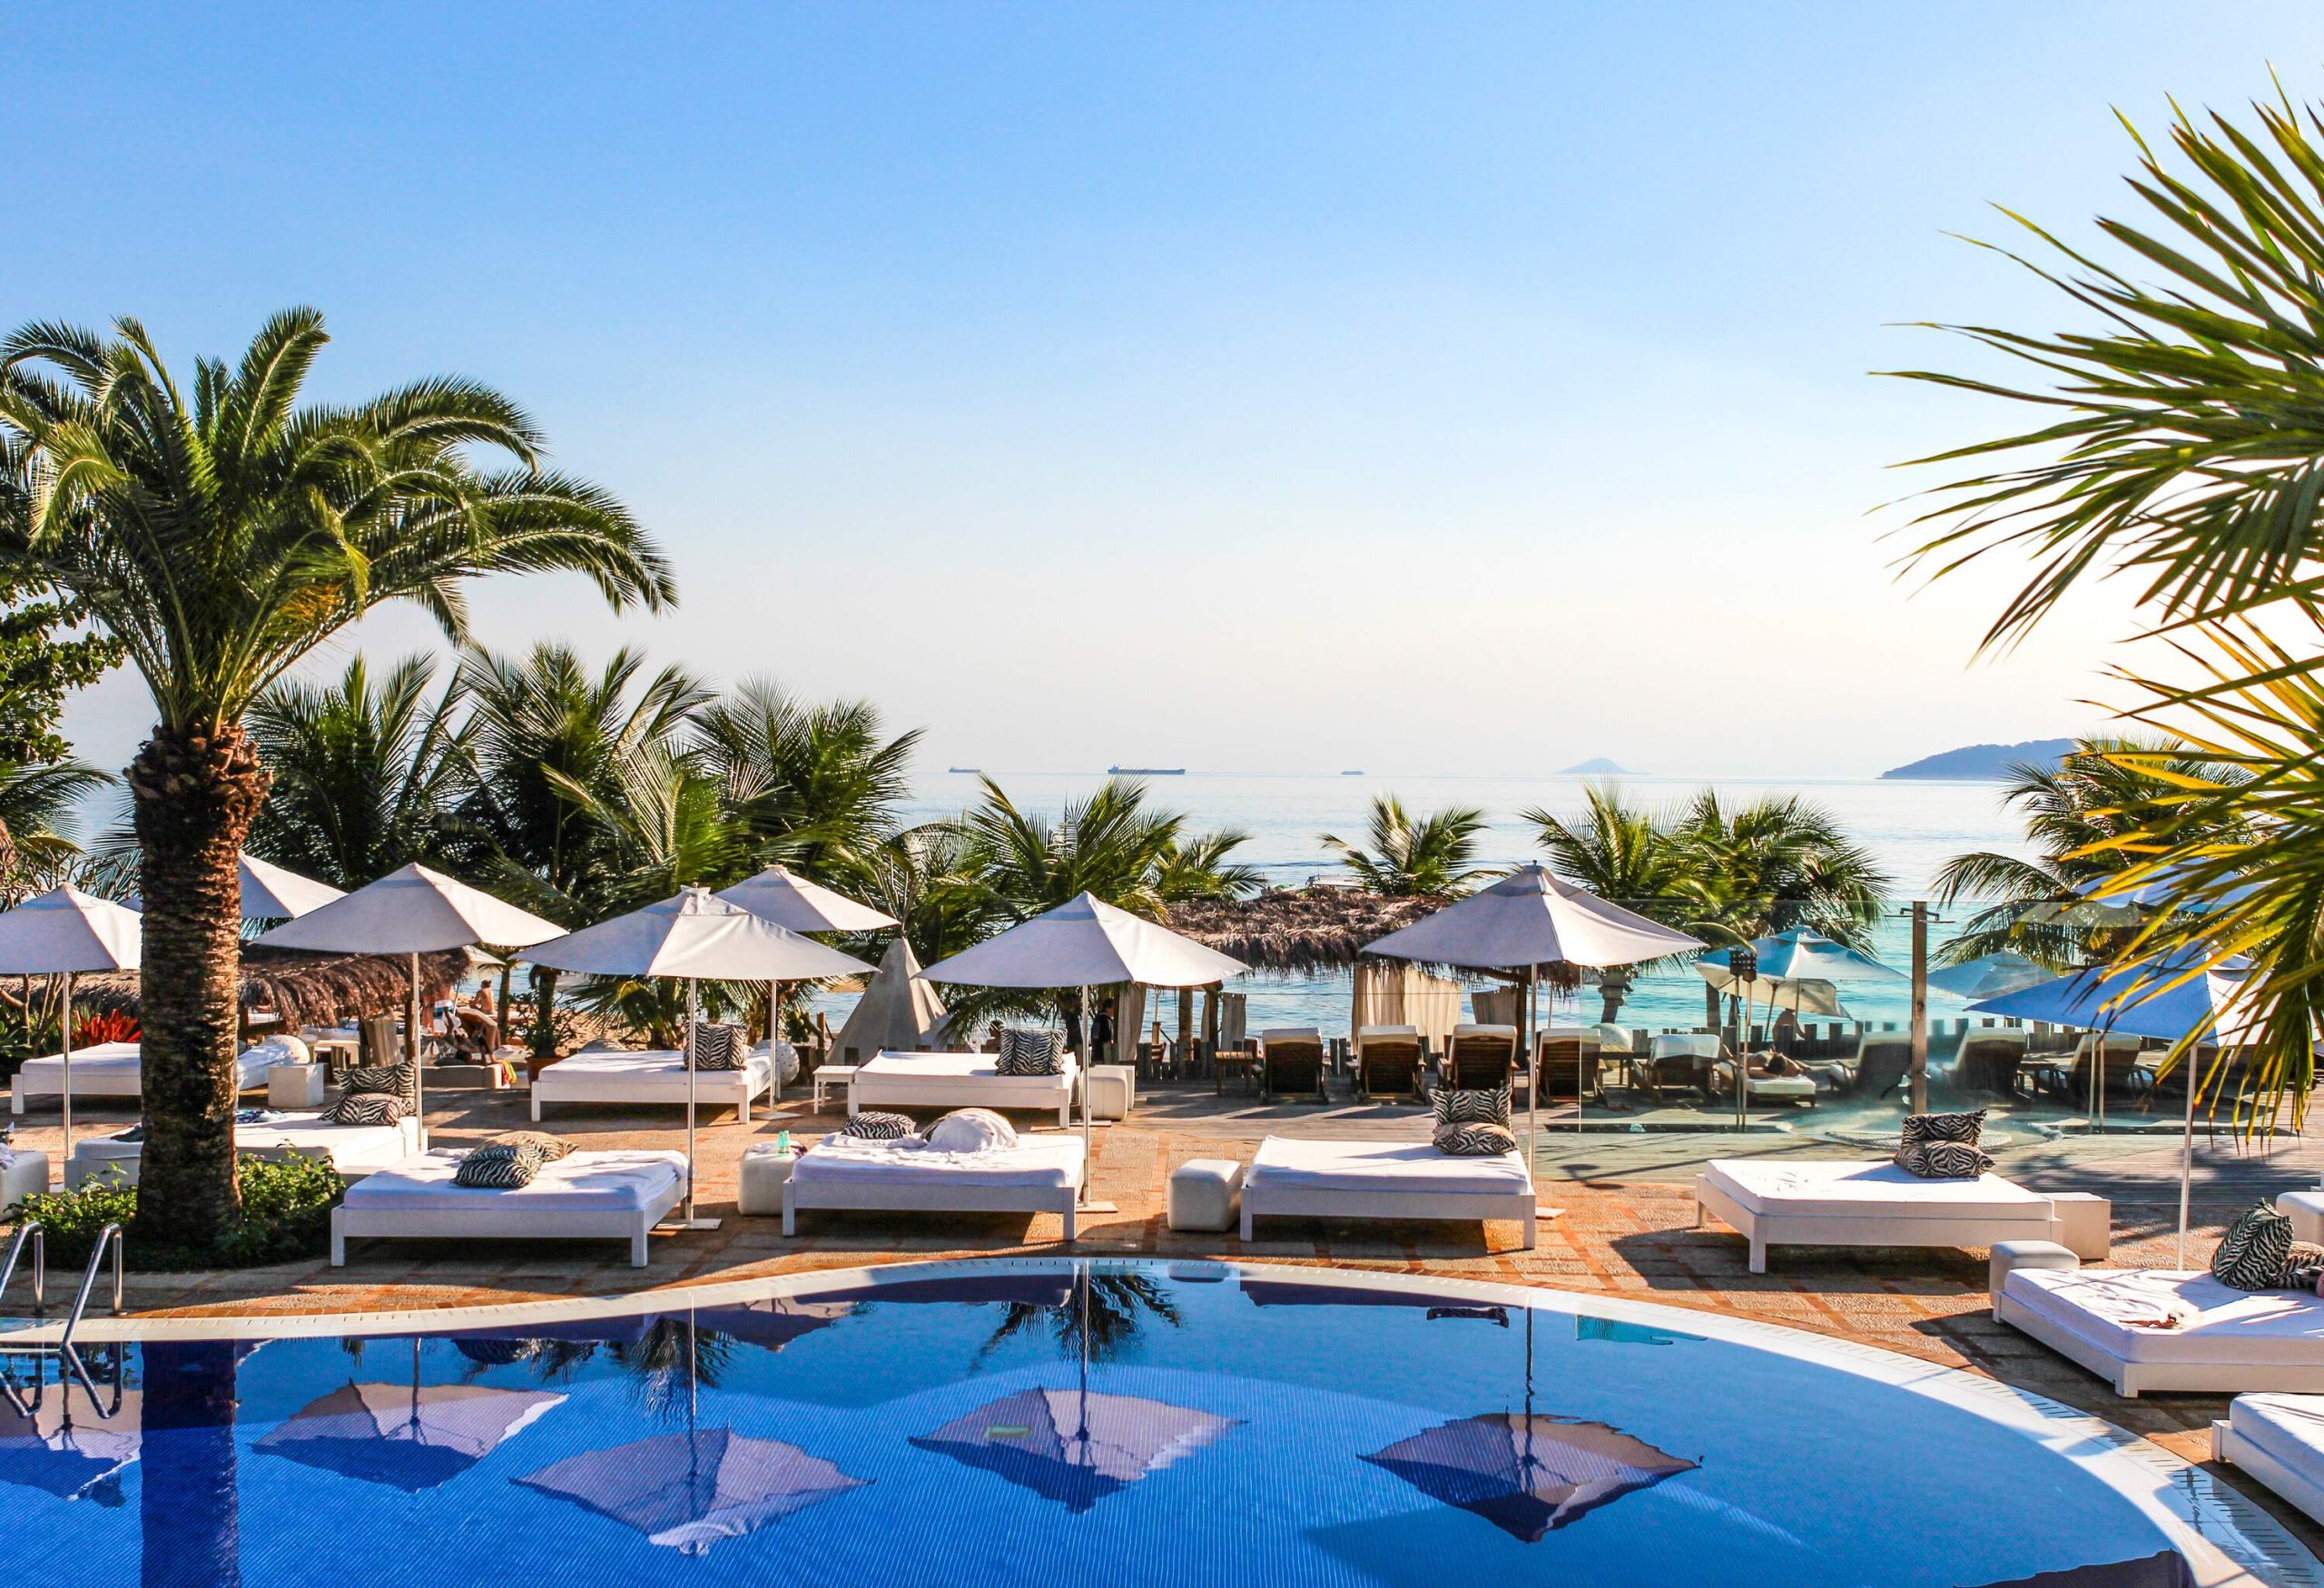 A swimming pool area, surrounded by foam-padded sun beds under parasols, extending to another row of sun beds lined up facing the sea, all framed by a tranquil backdrop of palm trees.